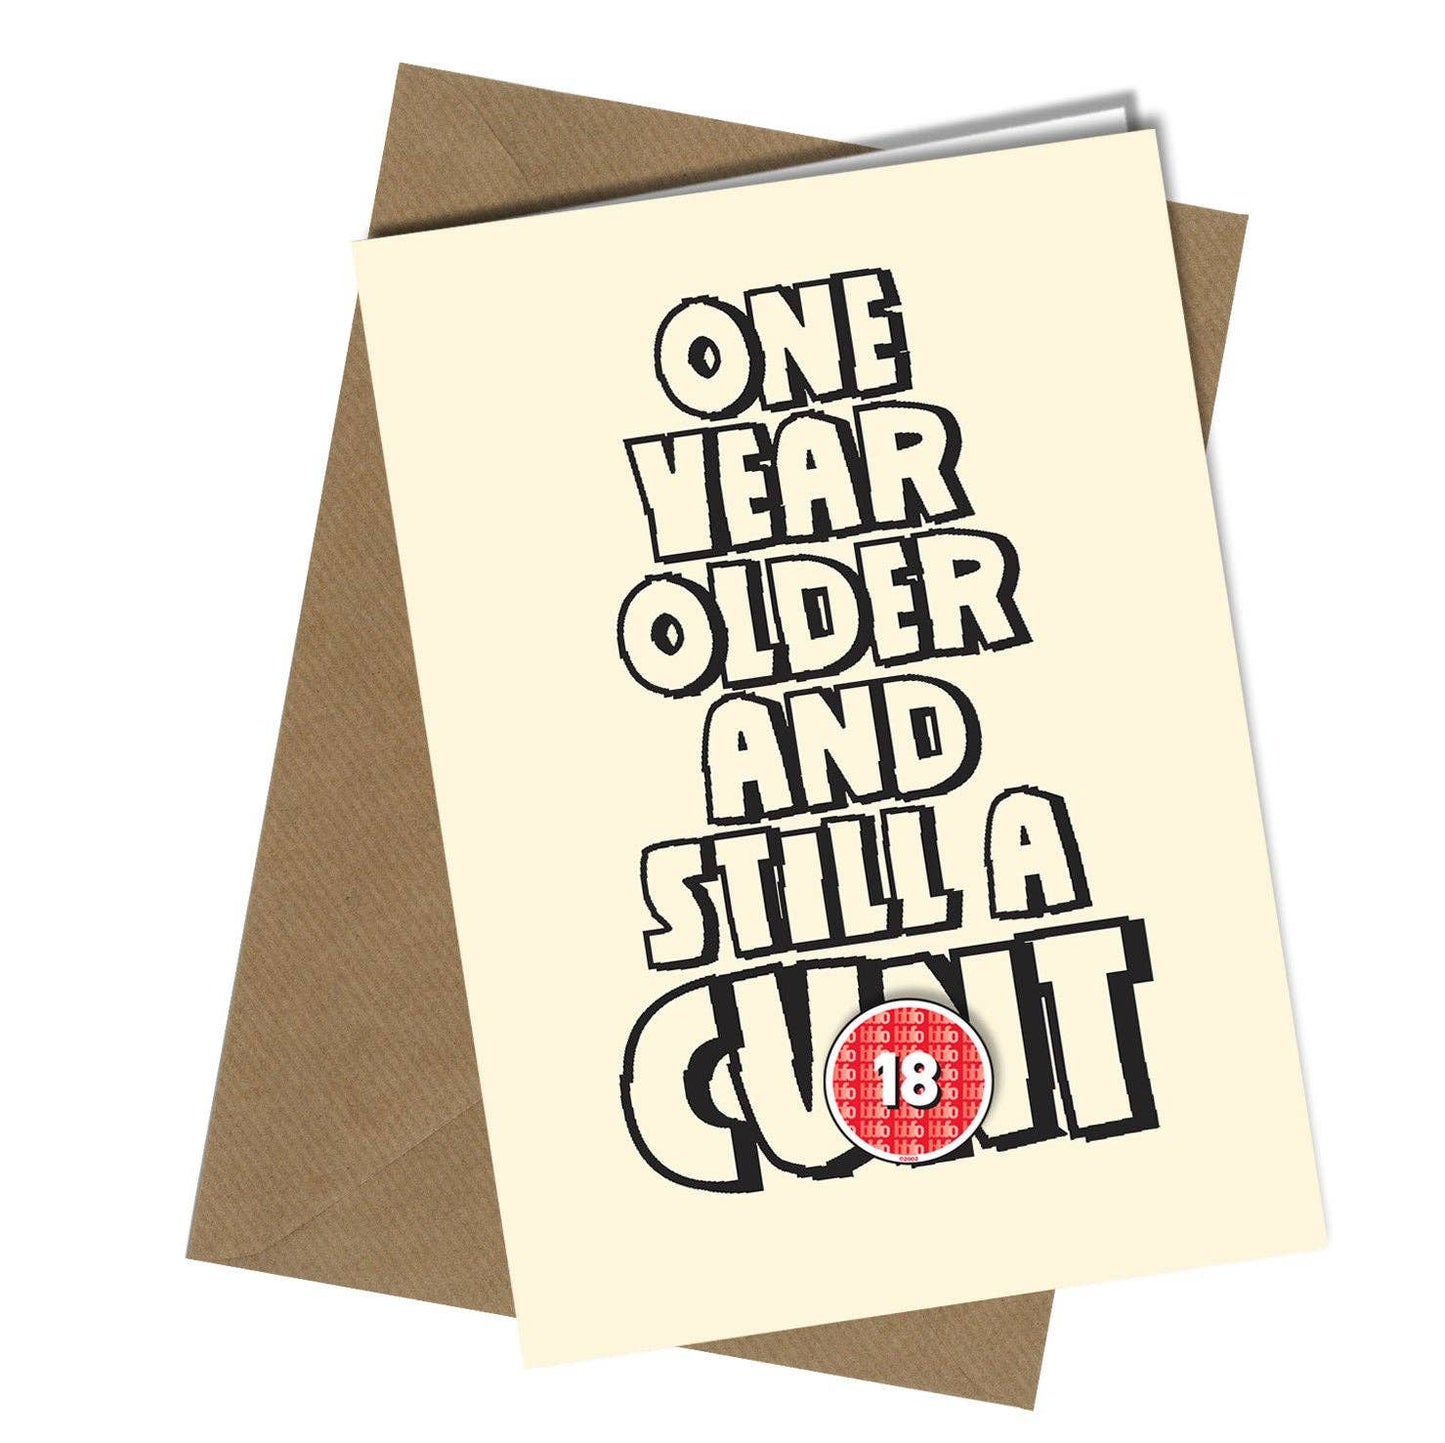 #57 One Year Older Close to the Bone Greeting Cards and Gifts